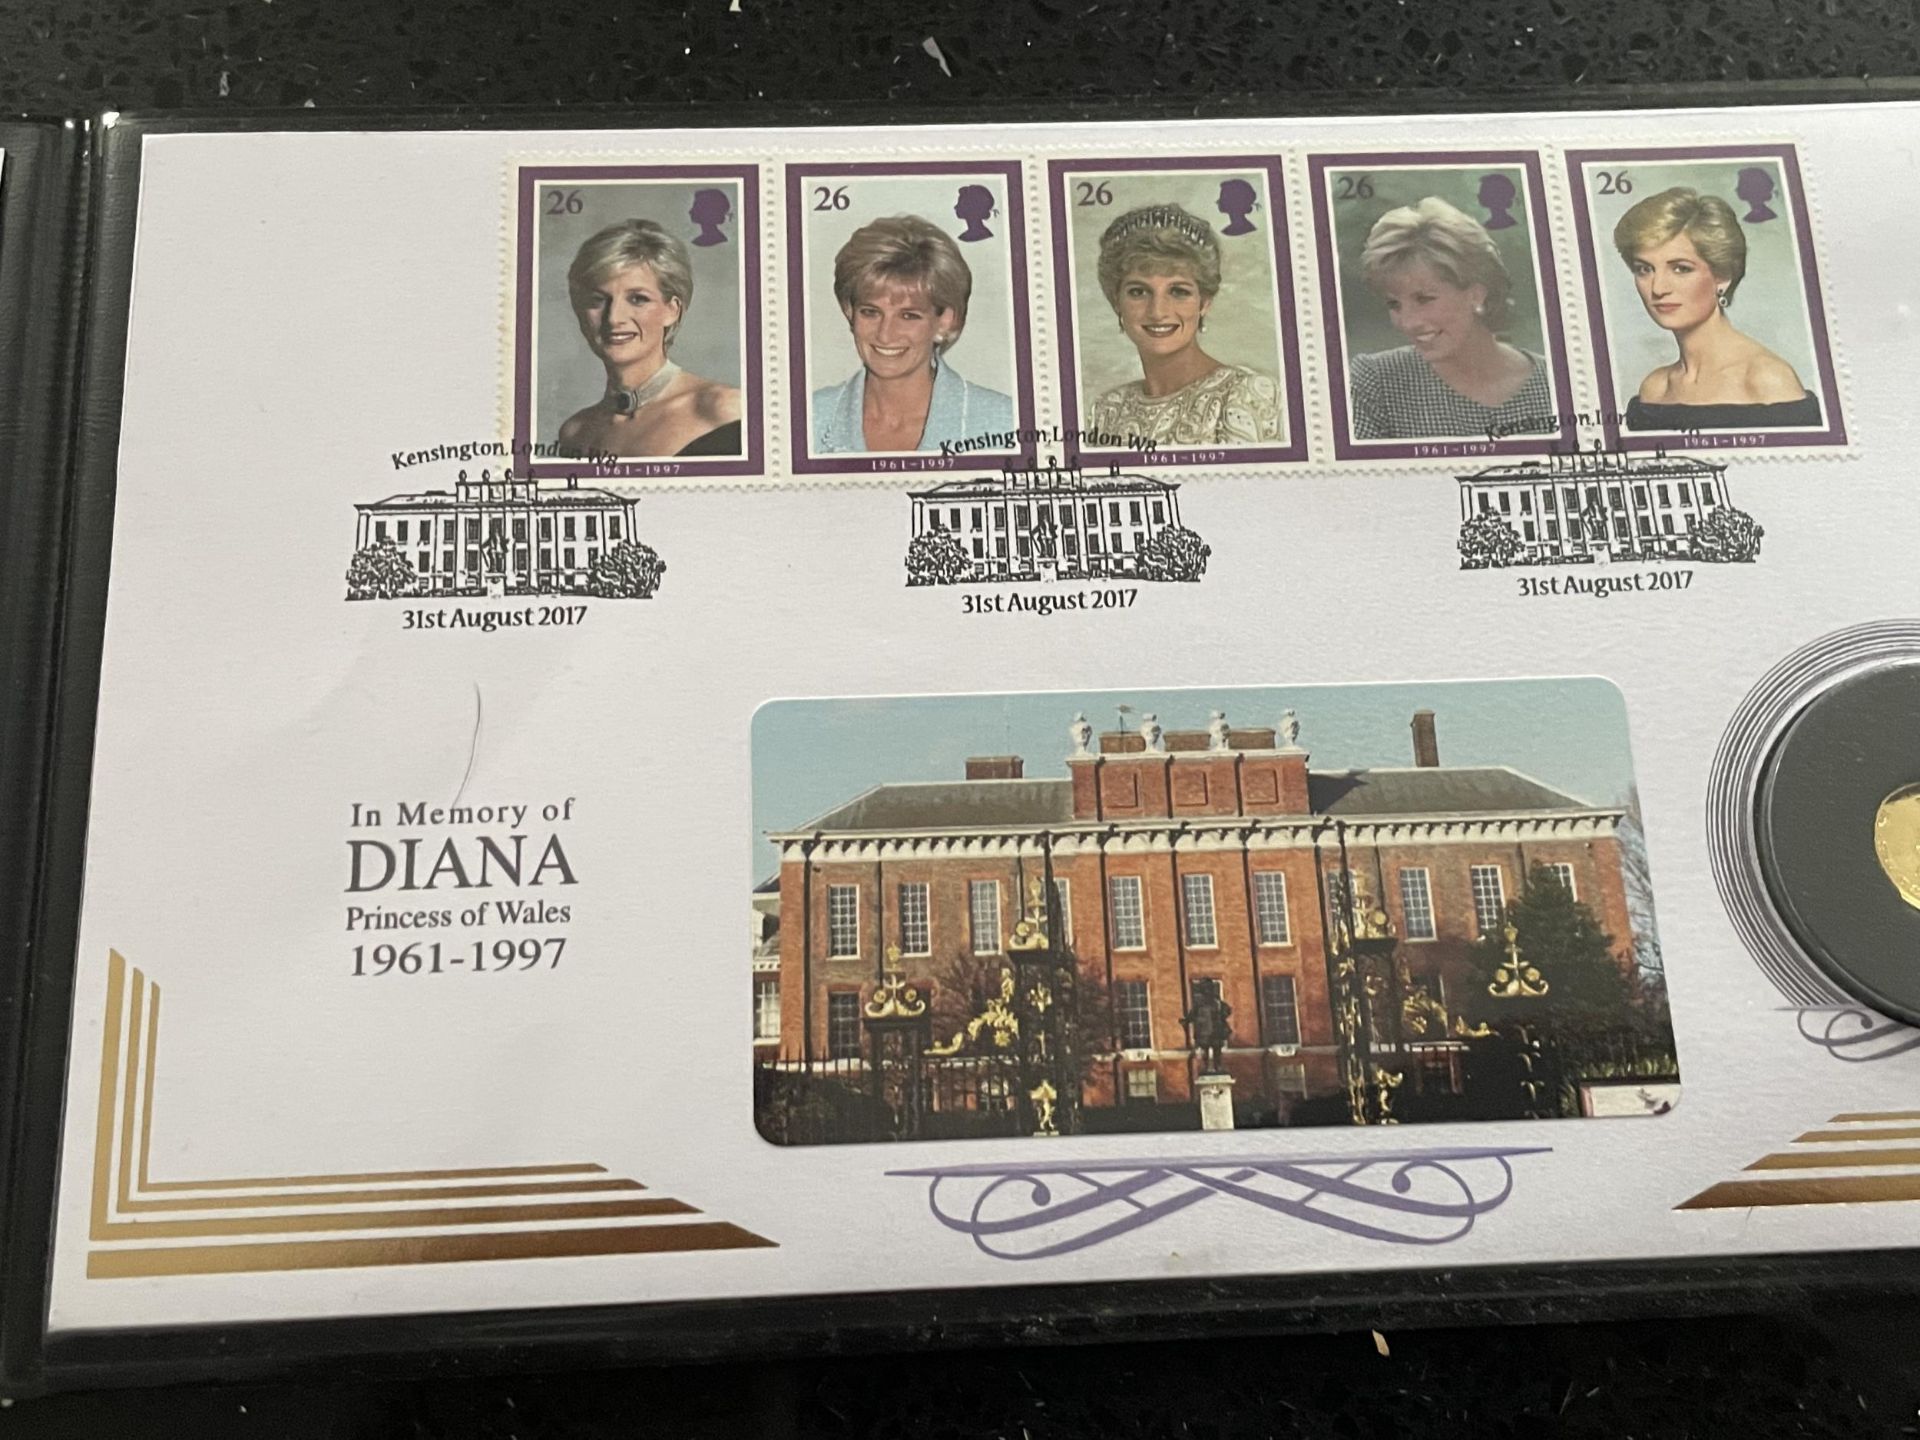 A PRINCESS DIANA 9 CARAT GOLD COMMEMORATIVE COIN COVER - LIMITED EDITION OF 499 - Image 2 of 4